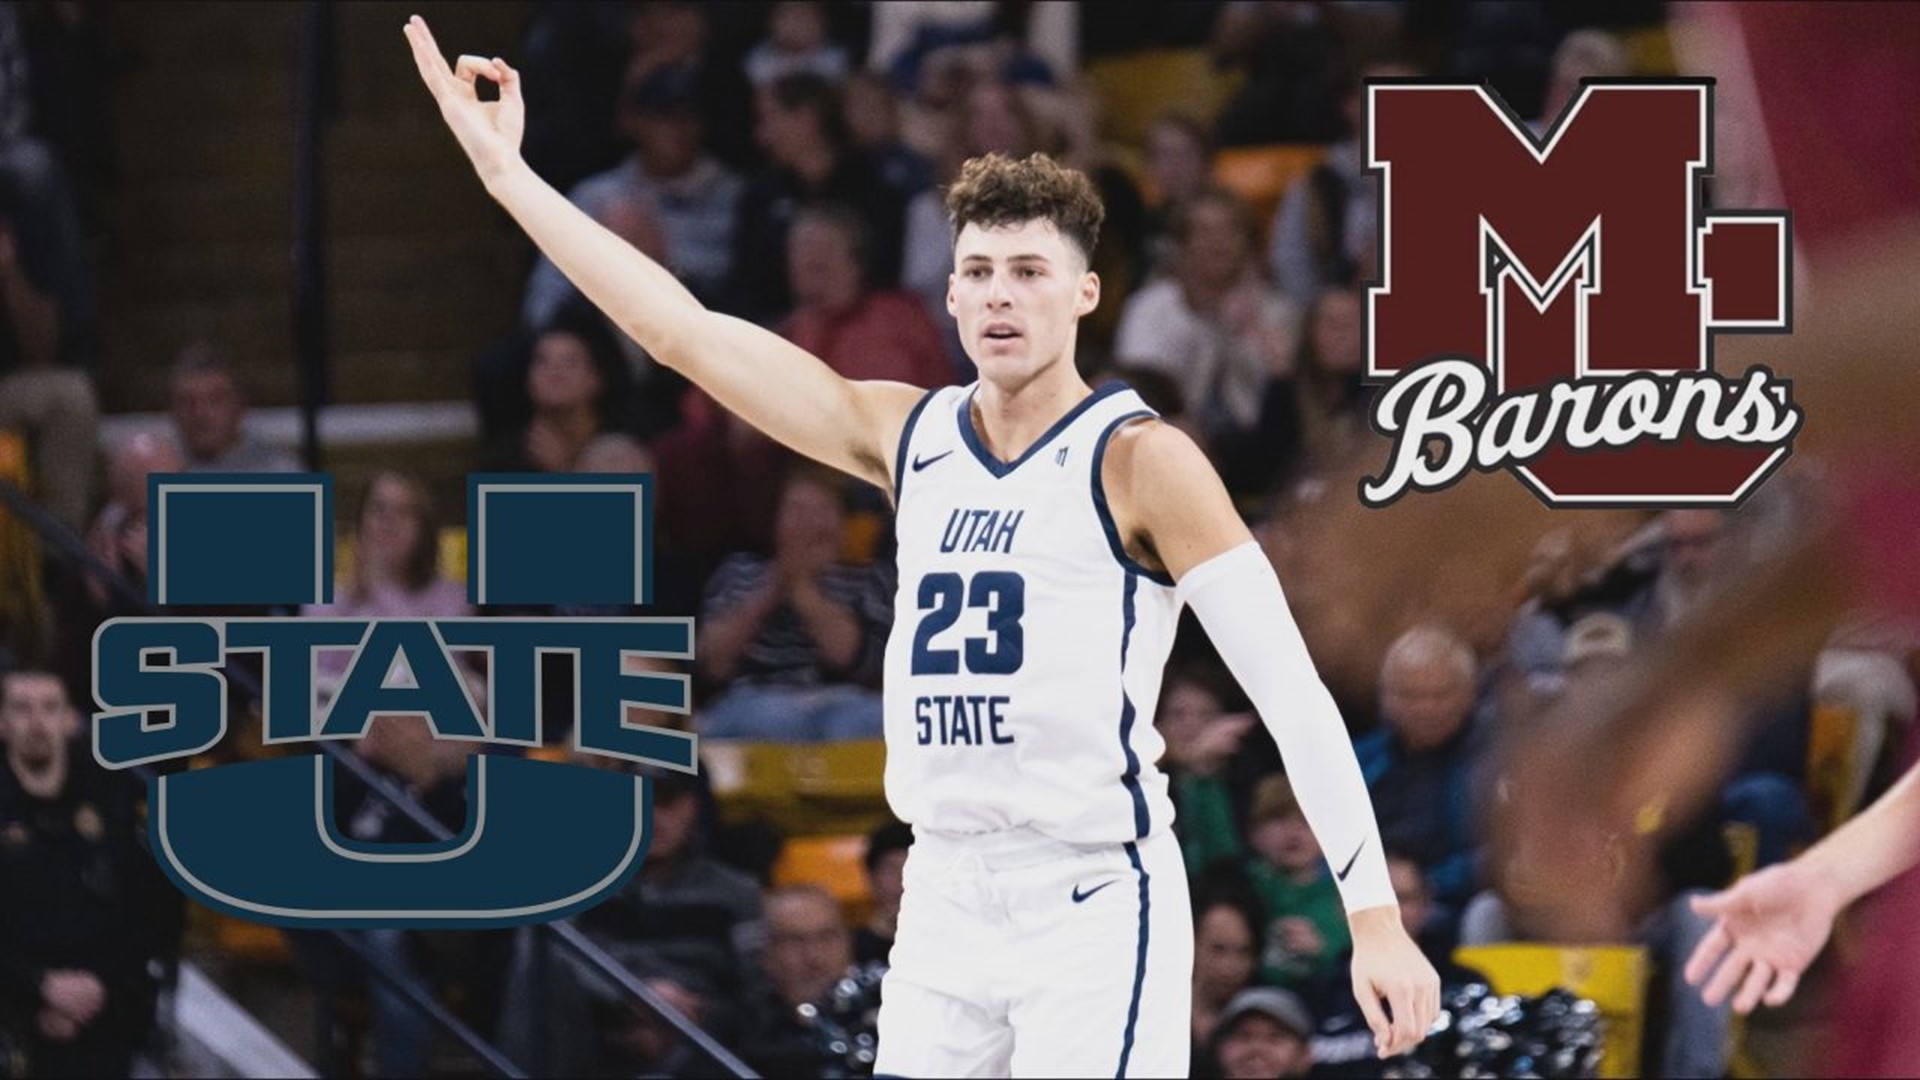 After transferring from St. Joseph's, Funk has helped Utah State to the NCAA Tournament where they will play Mizzou on Thursday afternoon.